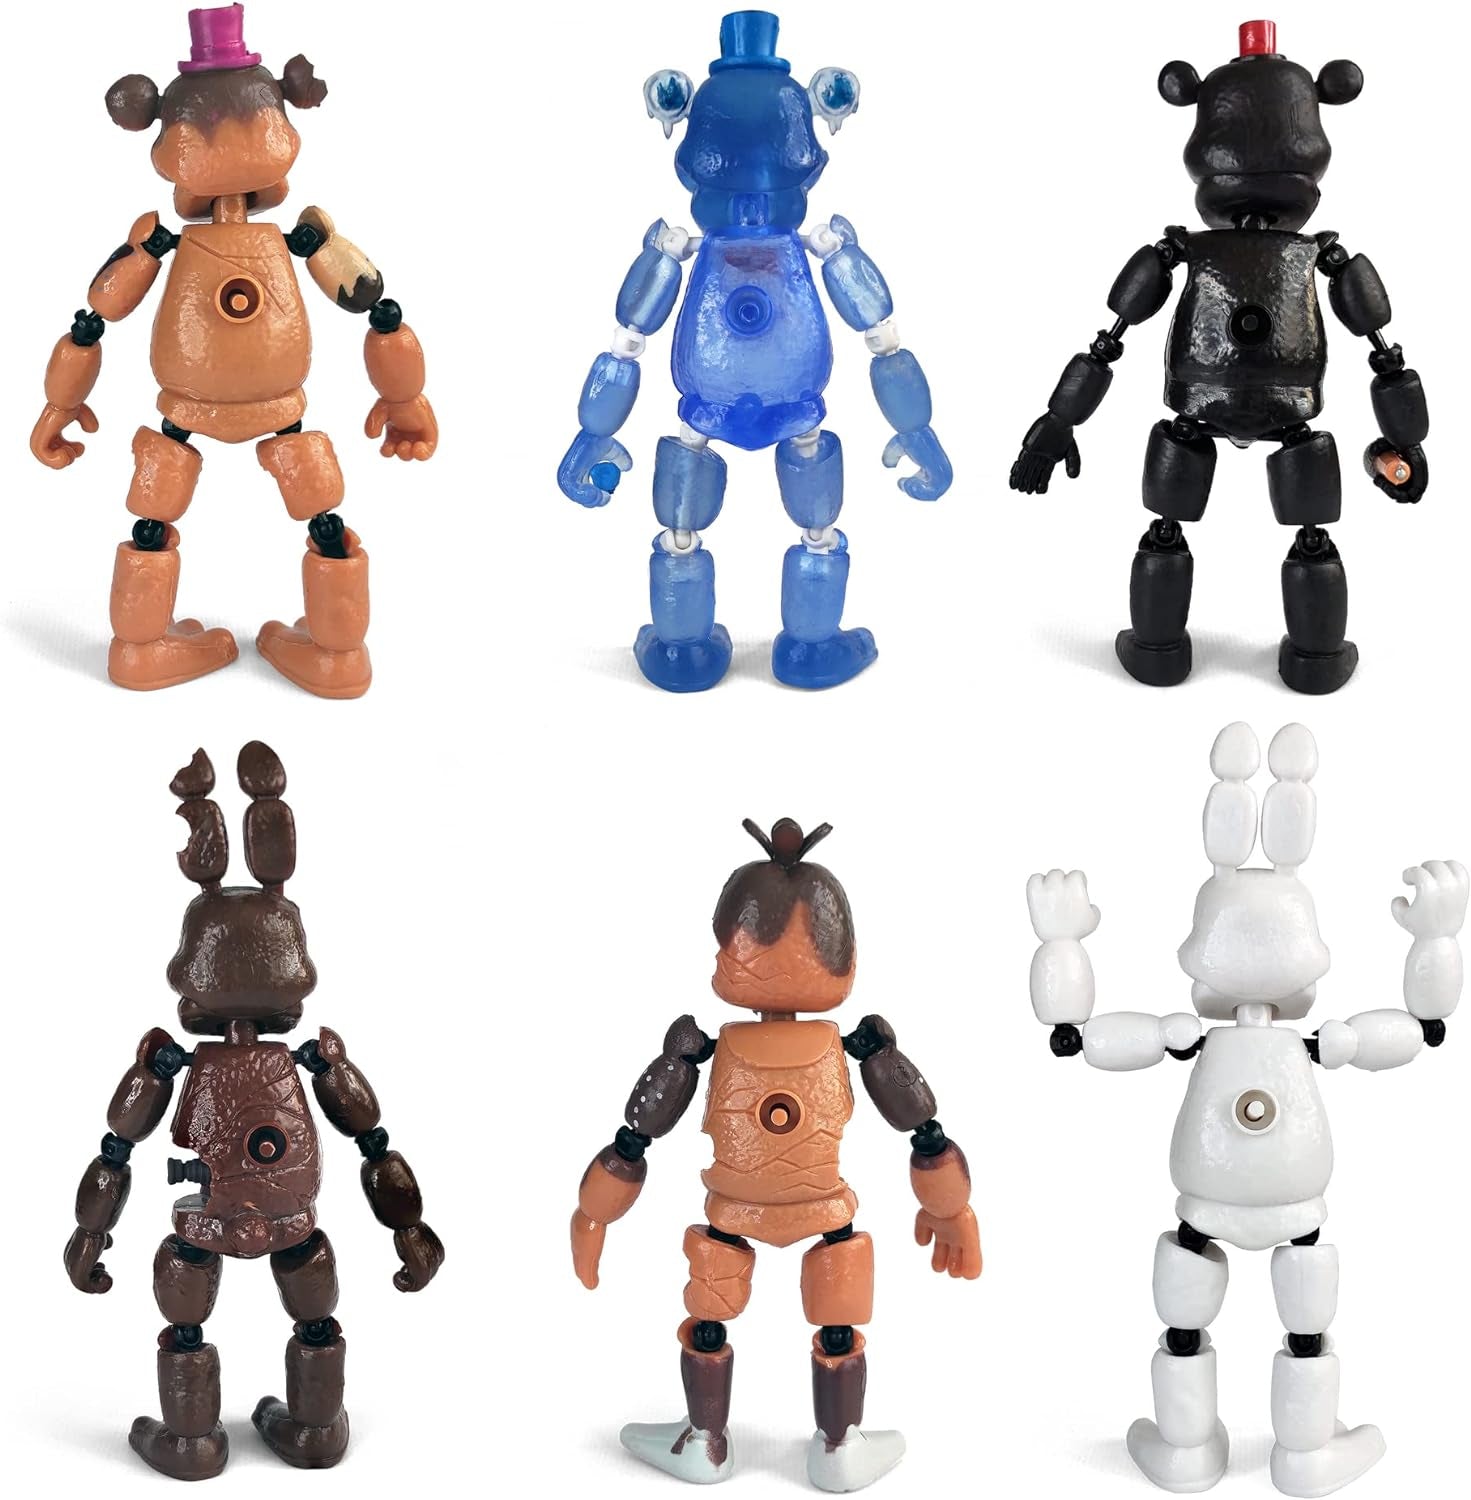 Inspired by Five Nights at Freddys | Chocolate | Freddy'S Action Figures Toys (FNAF) Set of 6 Pcs [Rockstar & Chocolate Freddy, Bonnie, Chica, Easter, Freddy Frostbear]